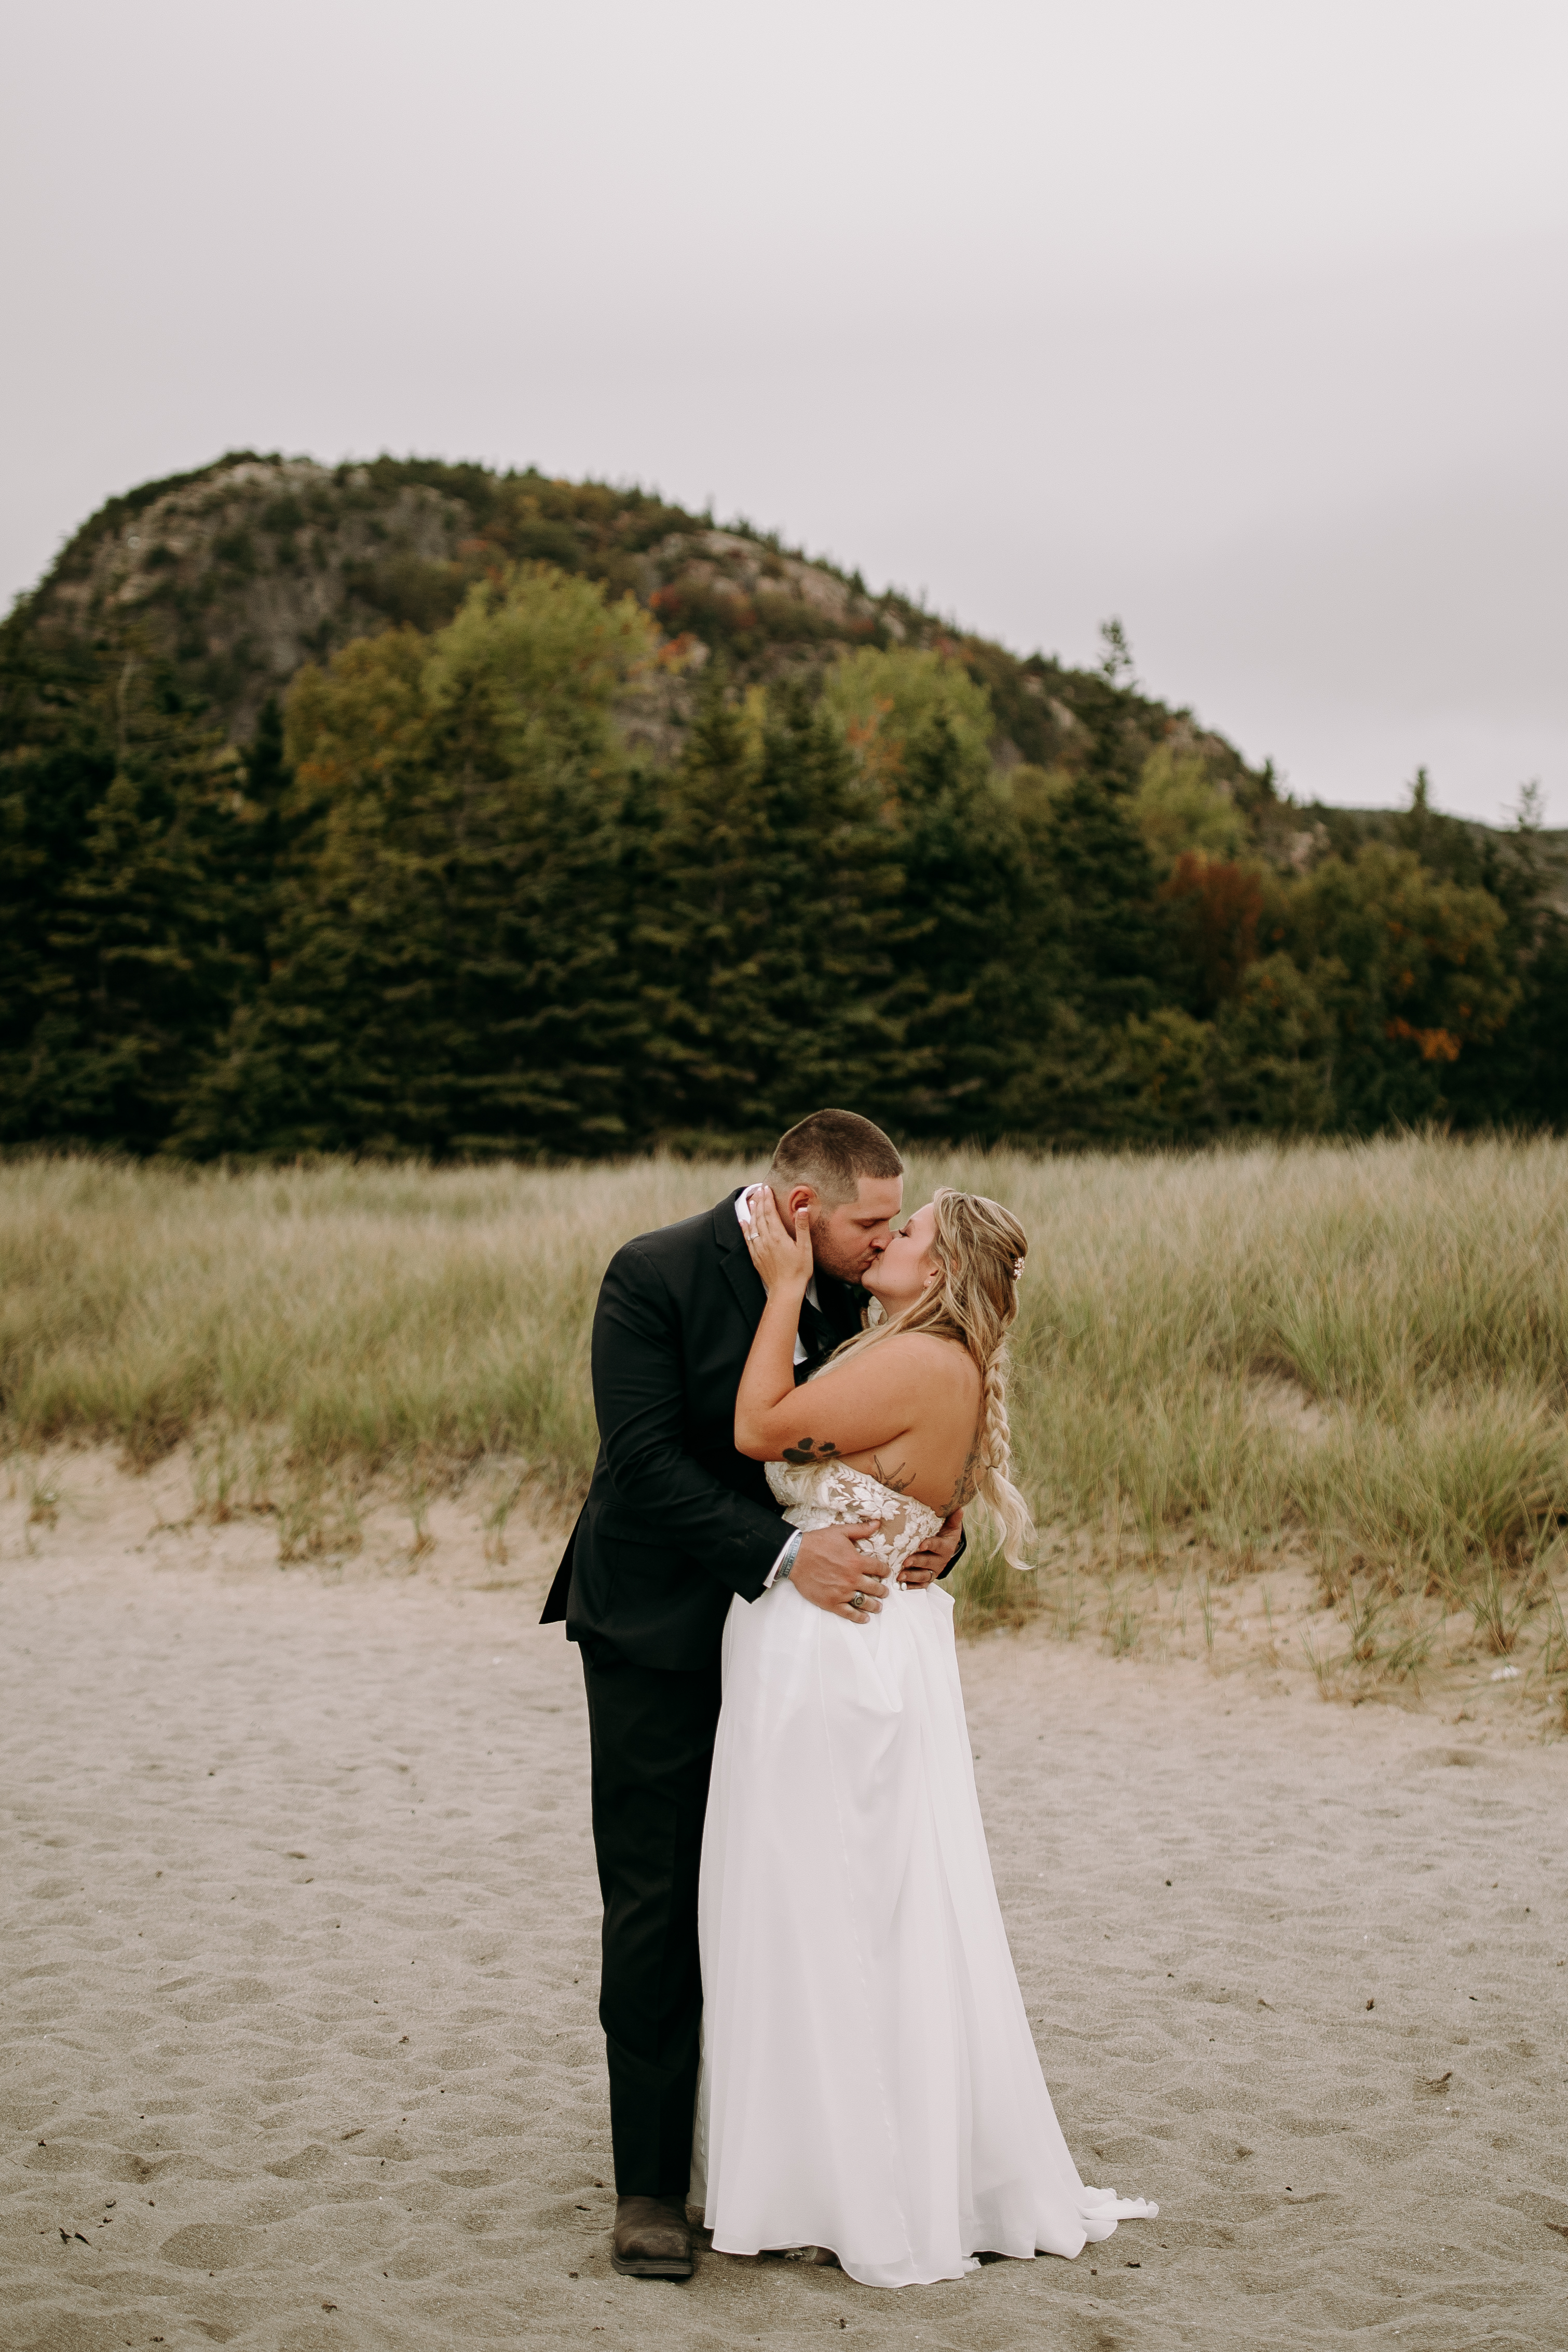 Bride and groom kissing on Sand Beach with Beehive trail in the background, couple is surrounded by sand dunes, tall grass and pine trees in Acadia National Park 